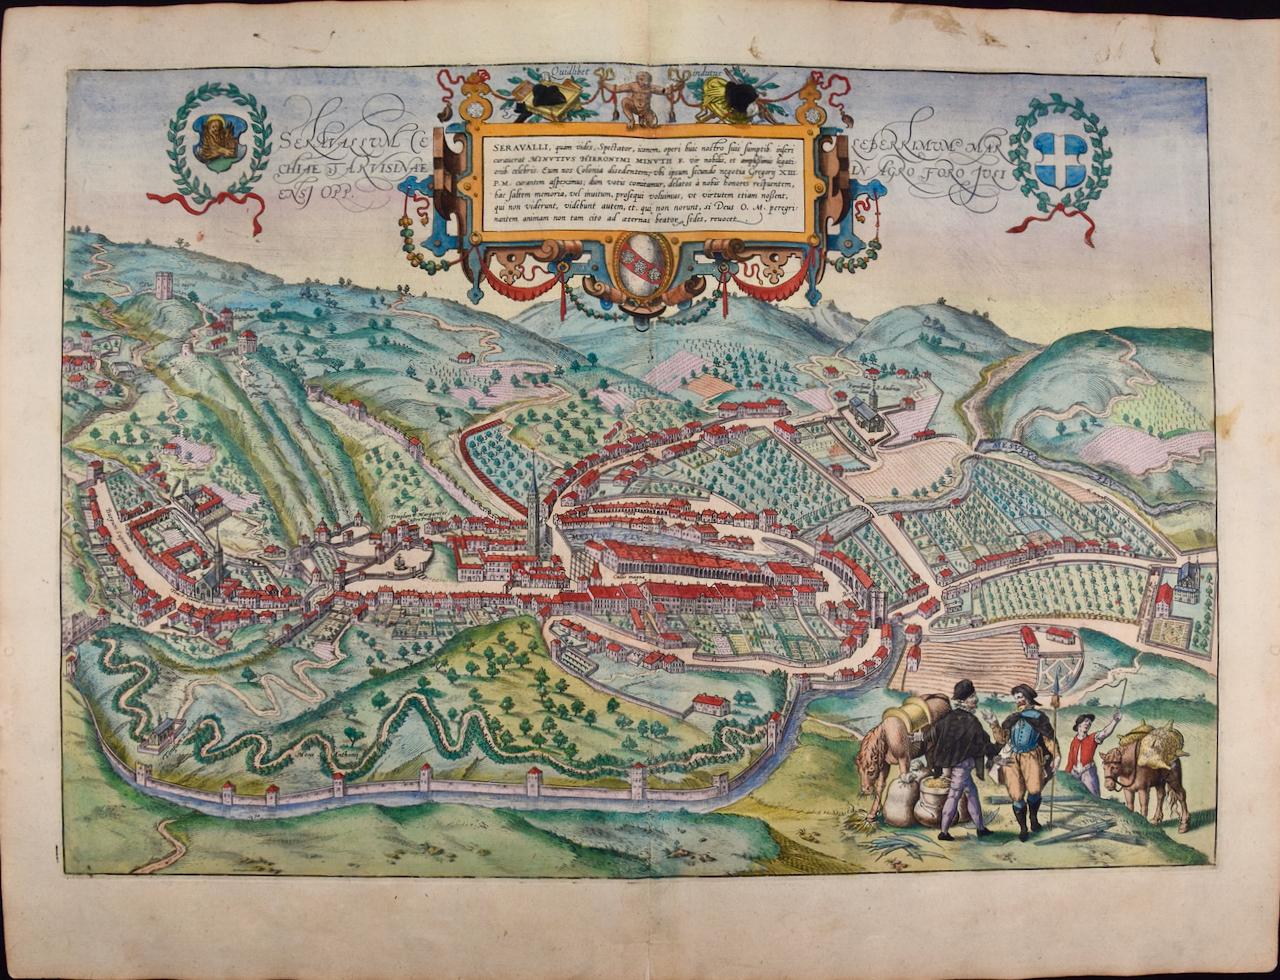 View of Seravalle, Italy: A 16th Century Hand-colored Map by Braun & Hogenberg